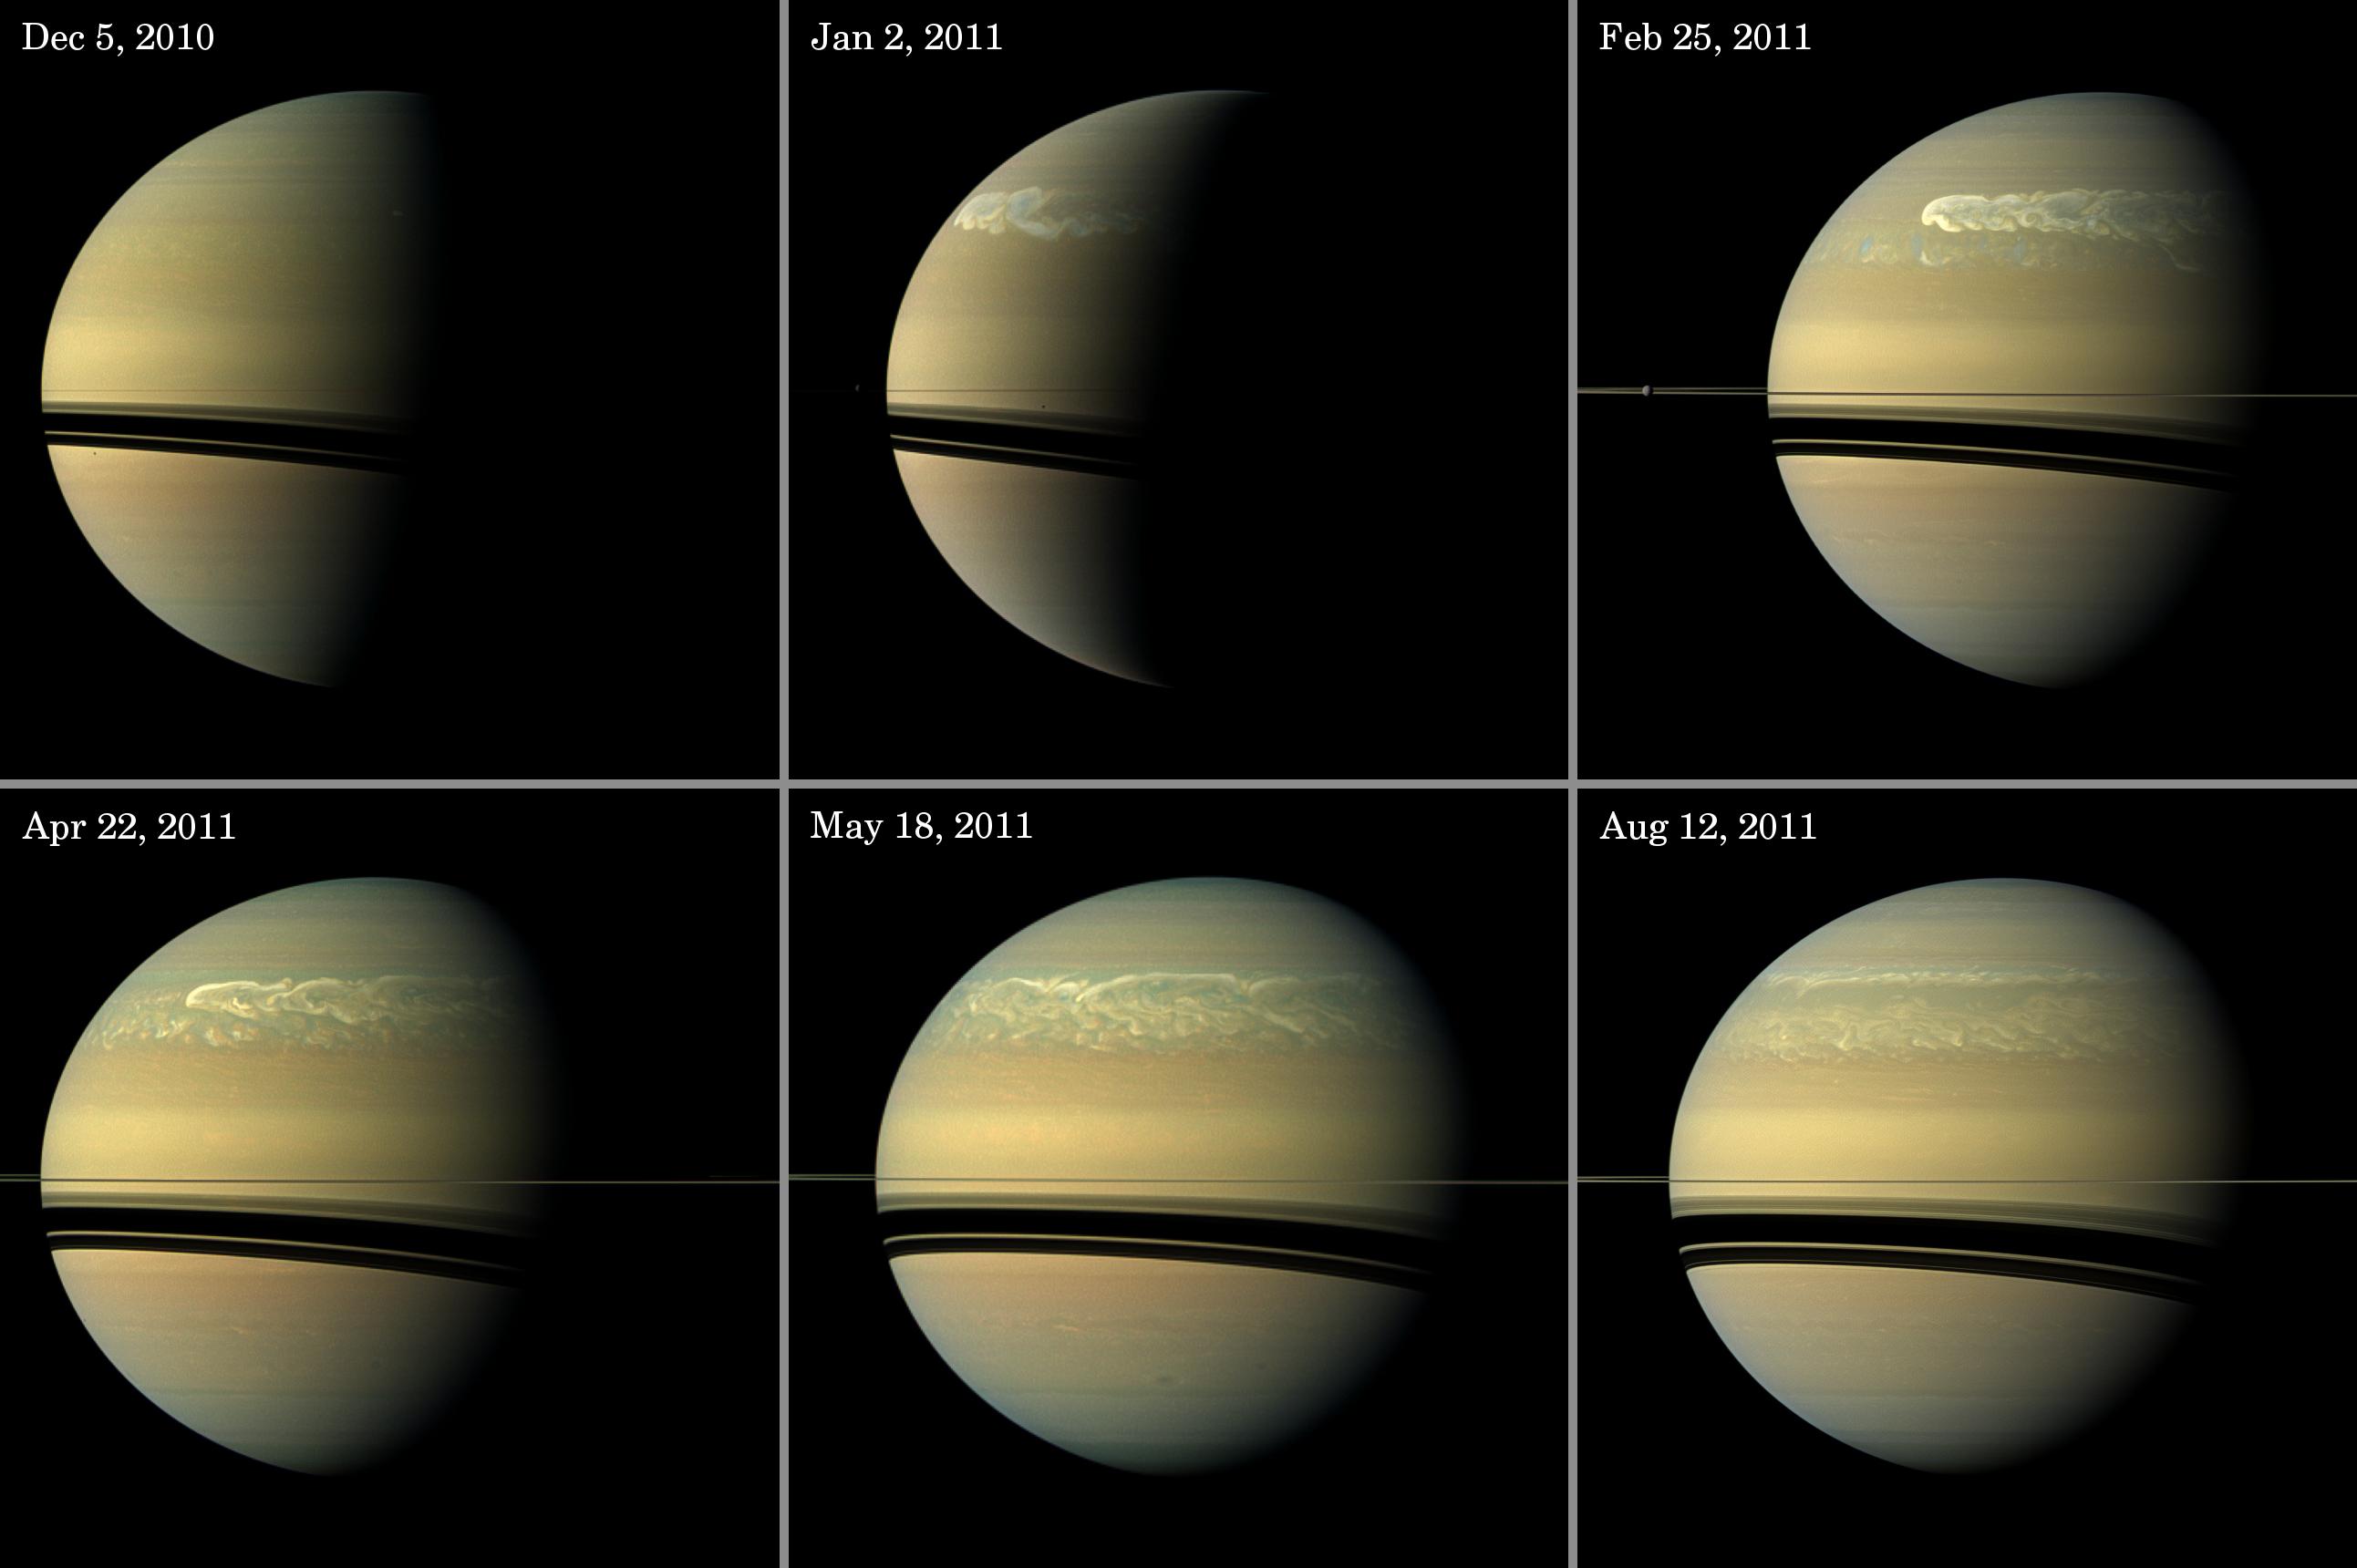 Six images of Saturn showing storms developing.